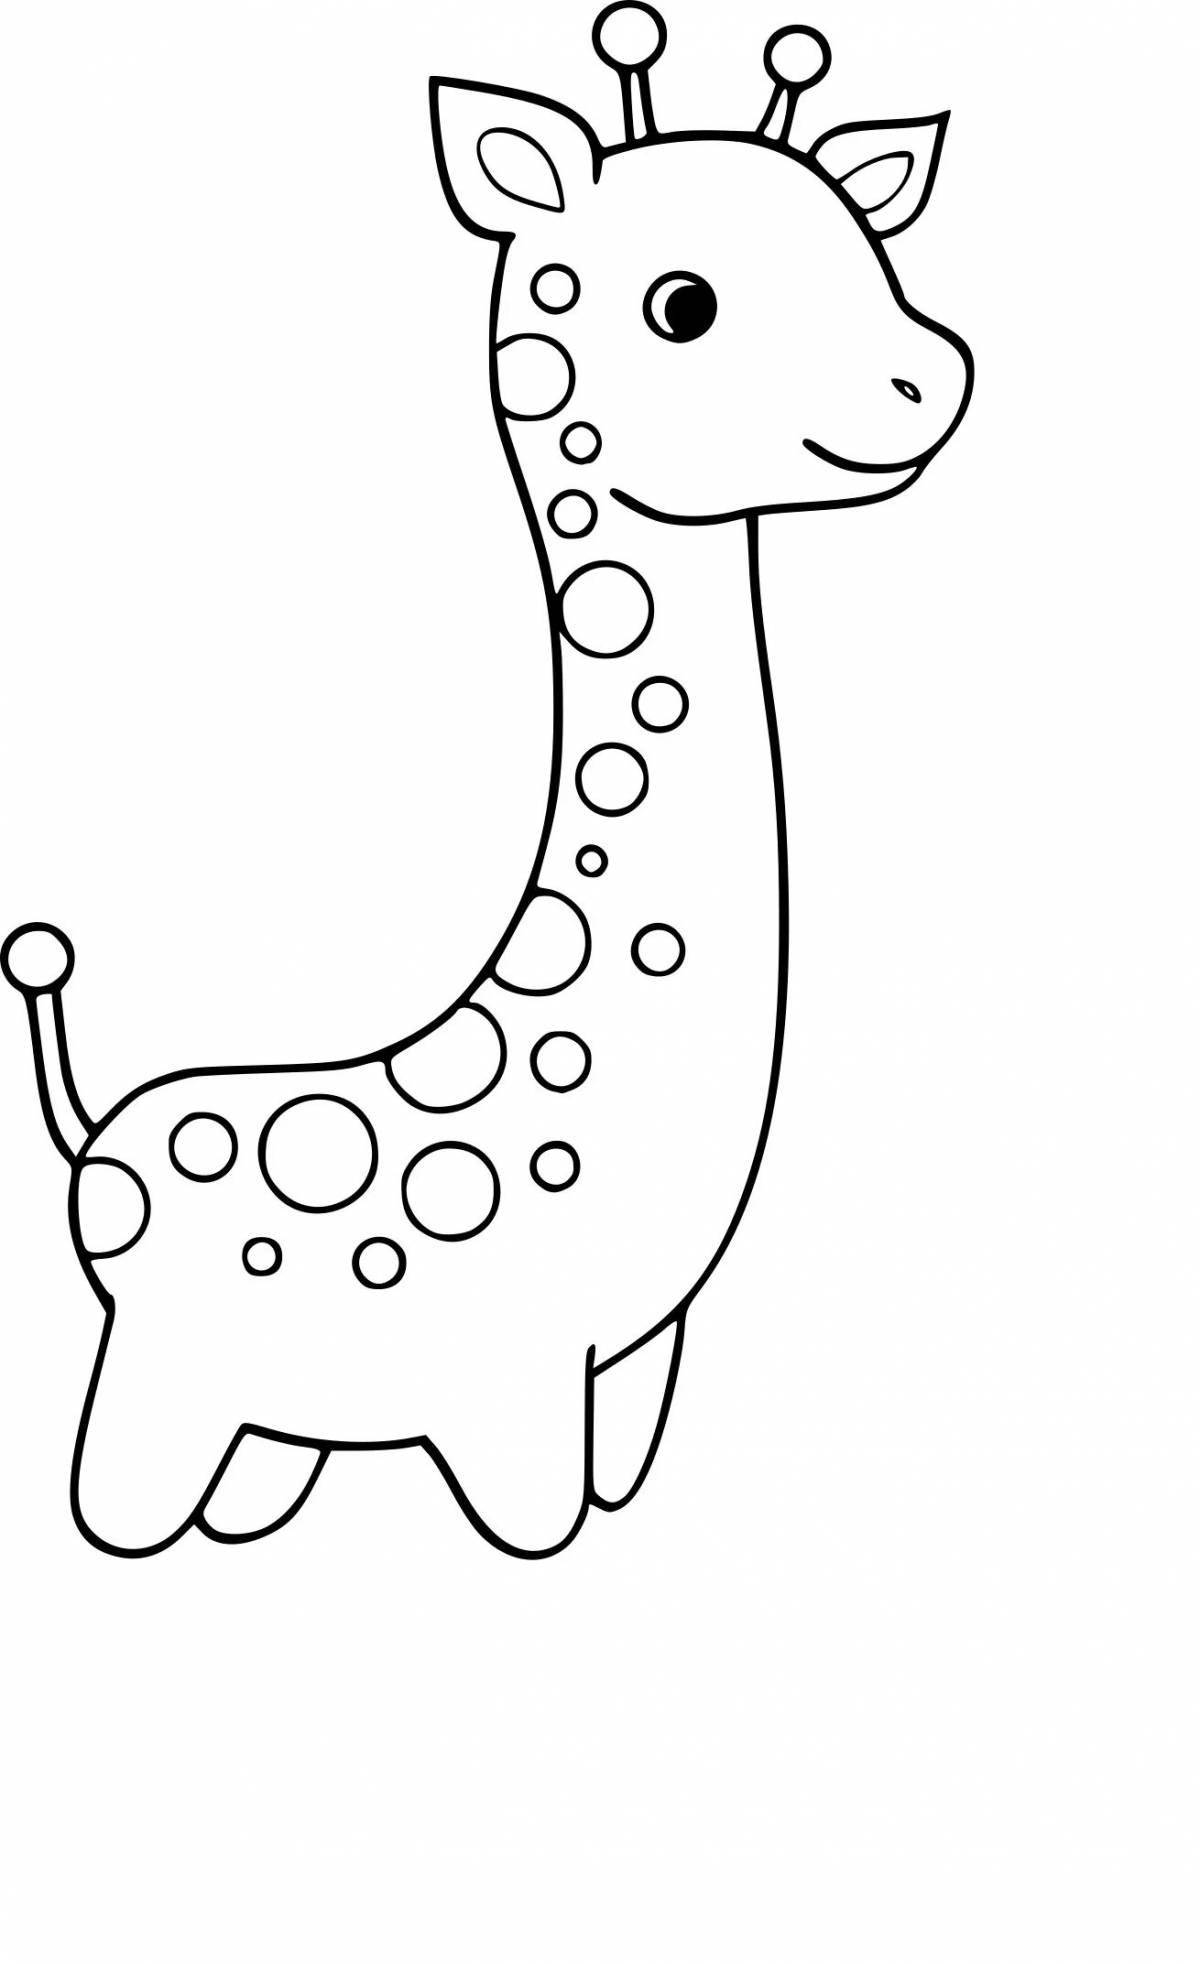 Blessed giraffe coloring pages for kids